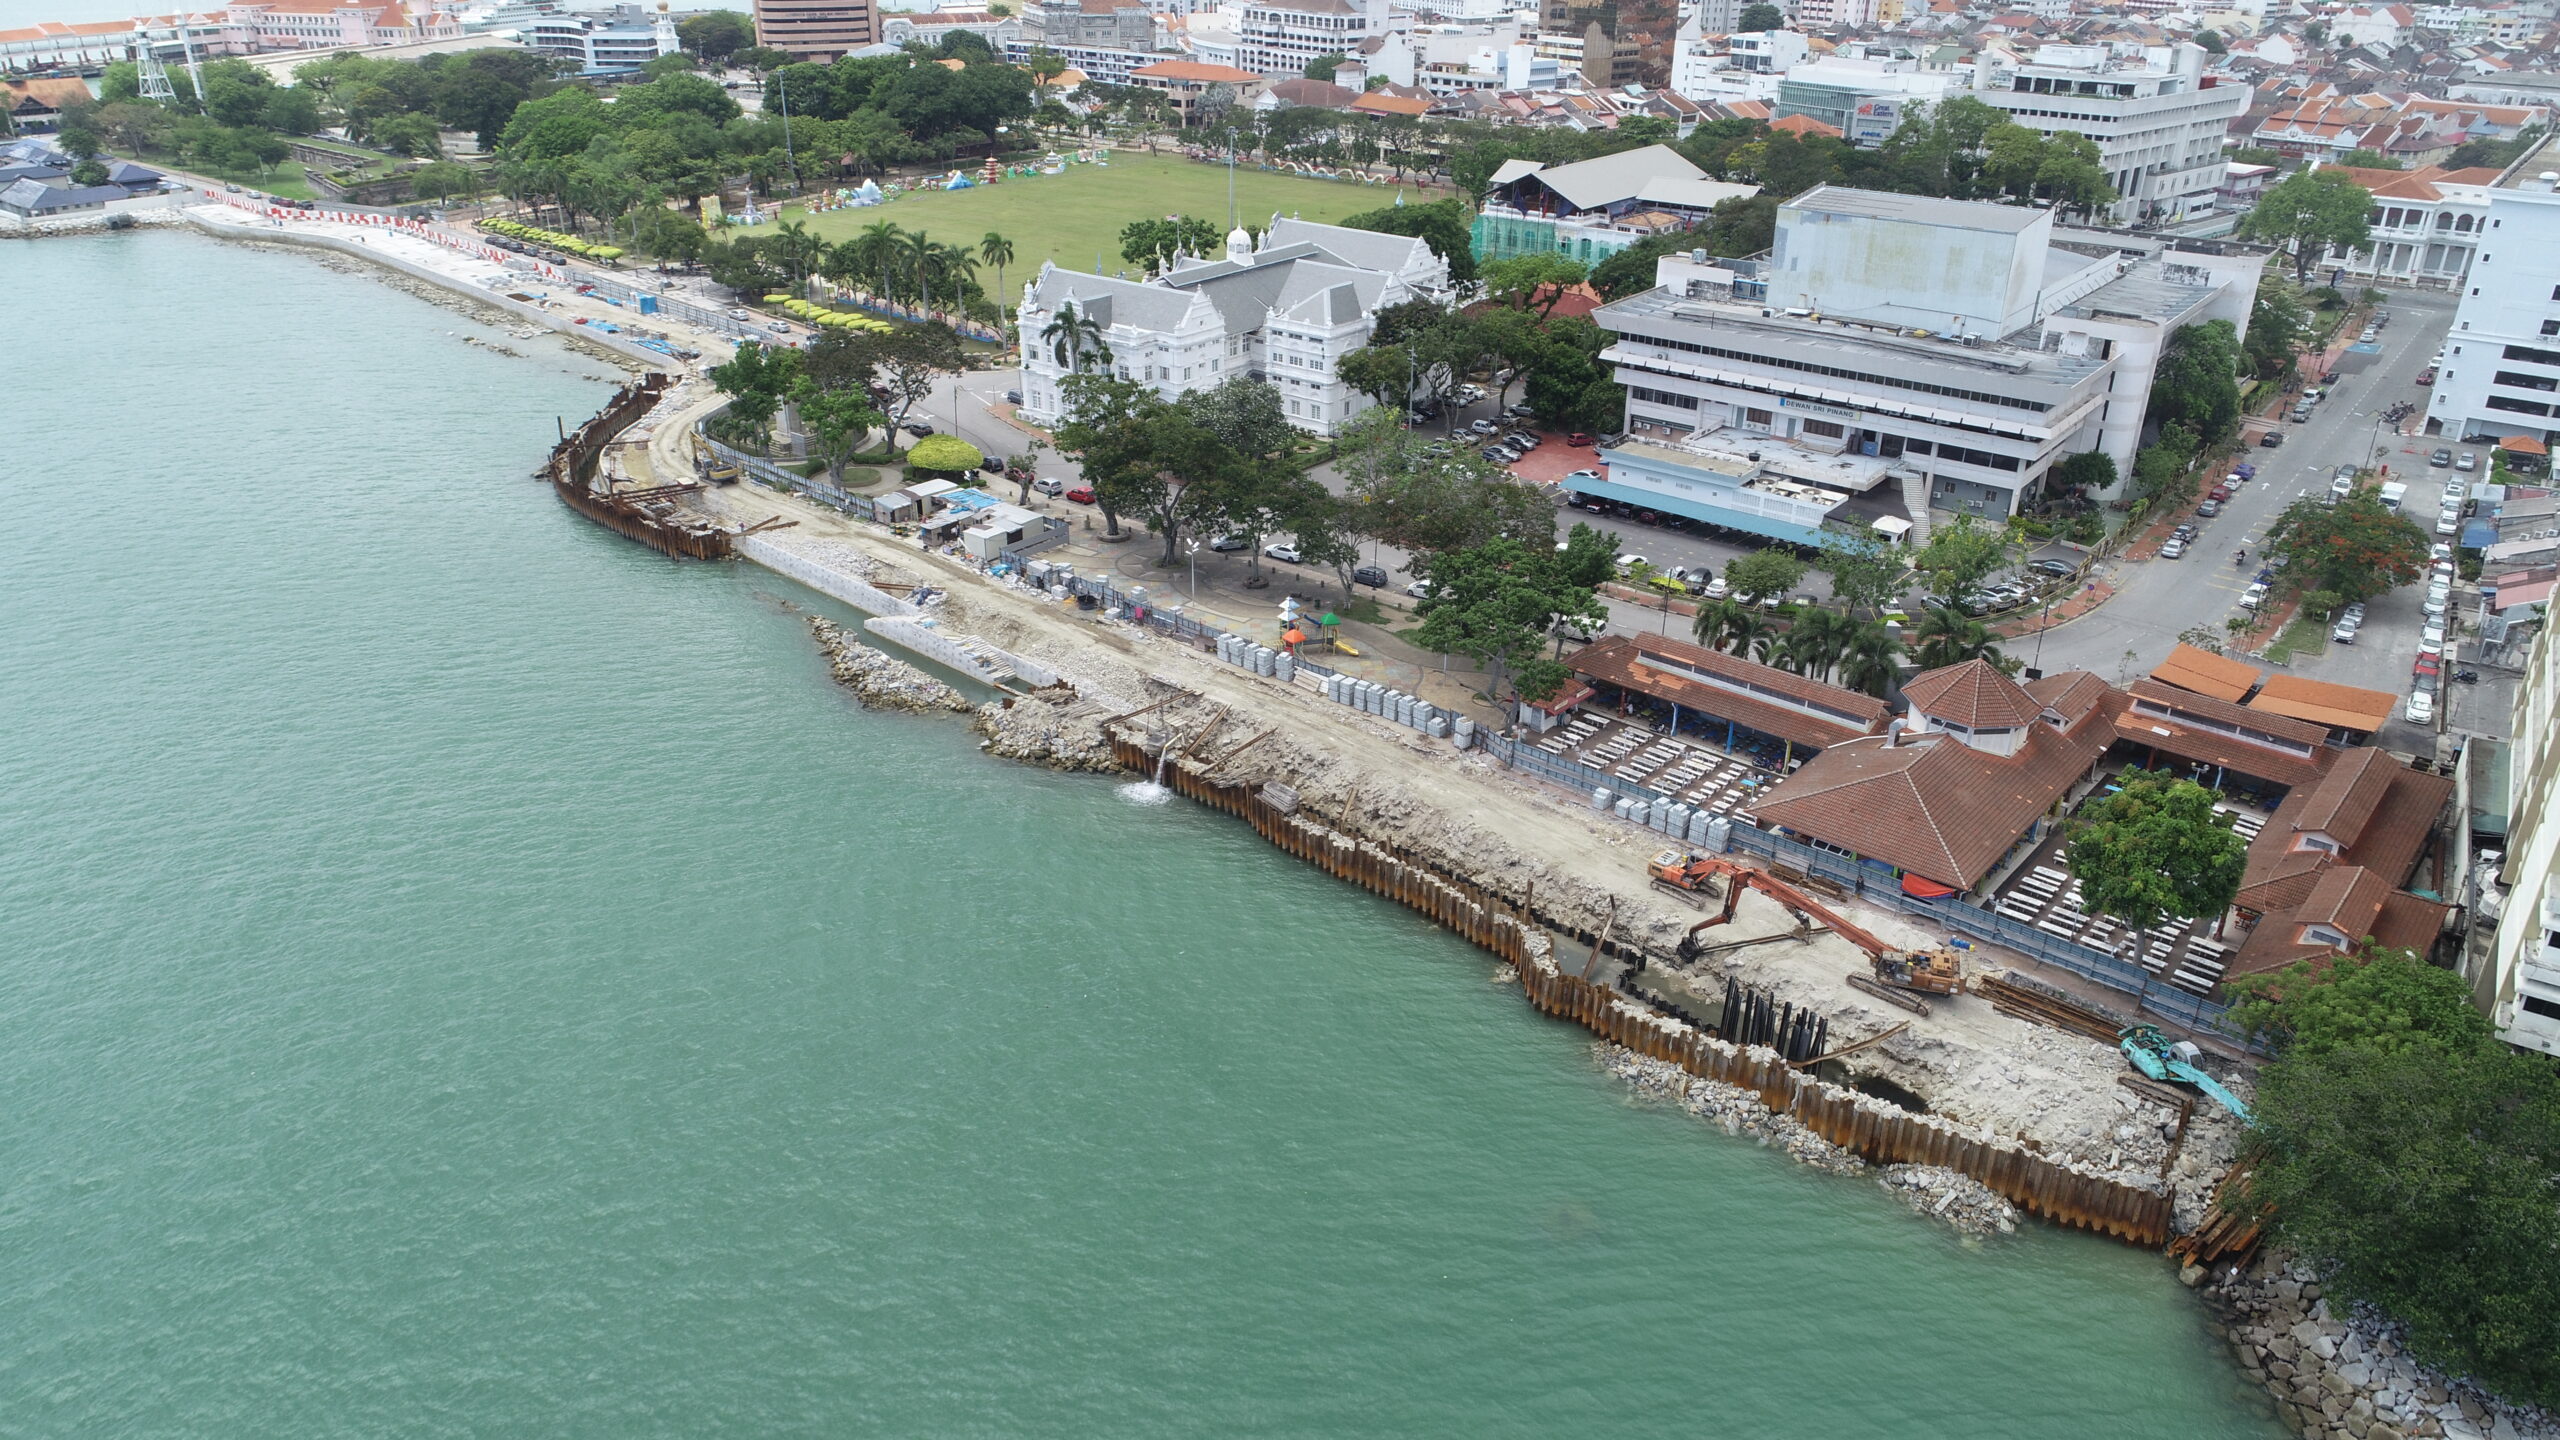 Penang breaks ground with the rejuvenation of the historic Esplanade Seawall